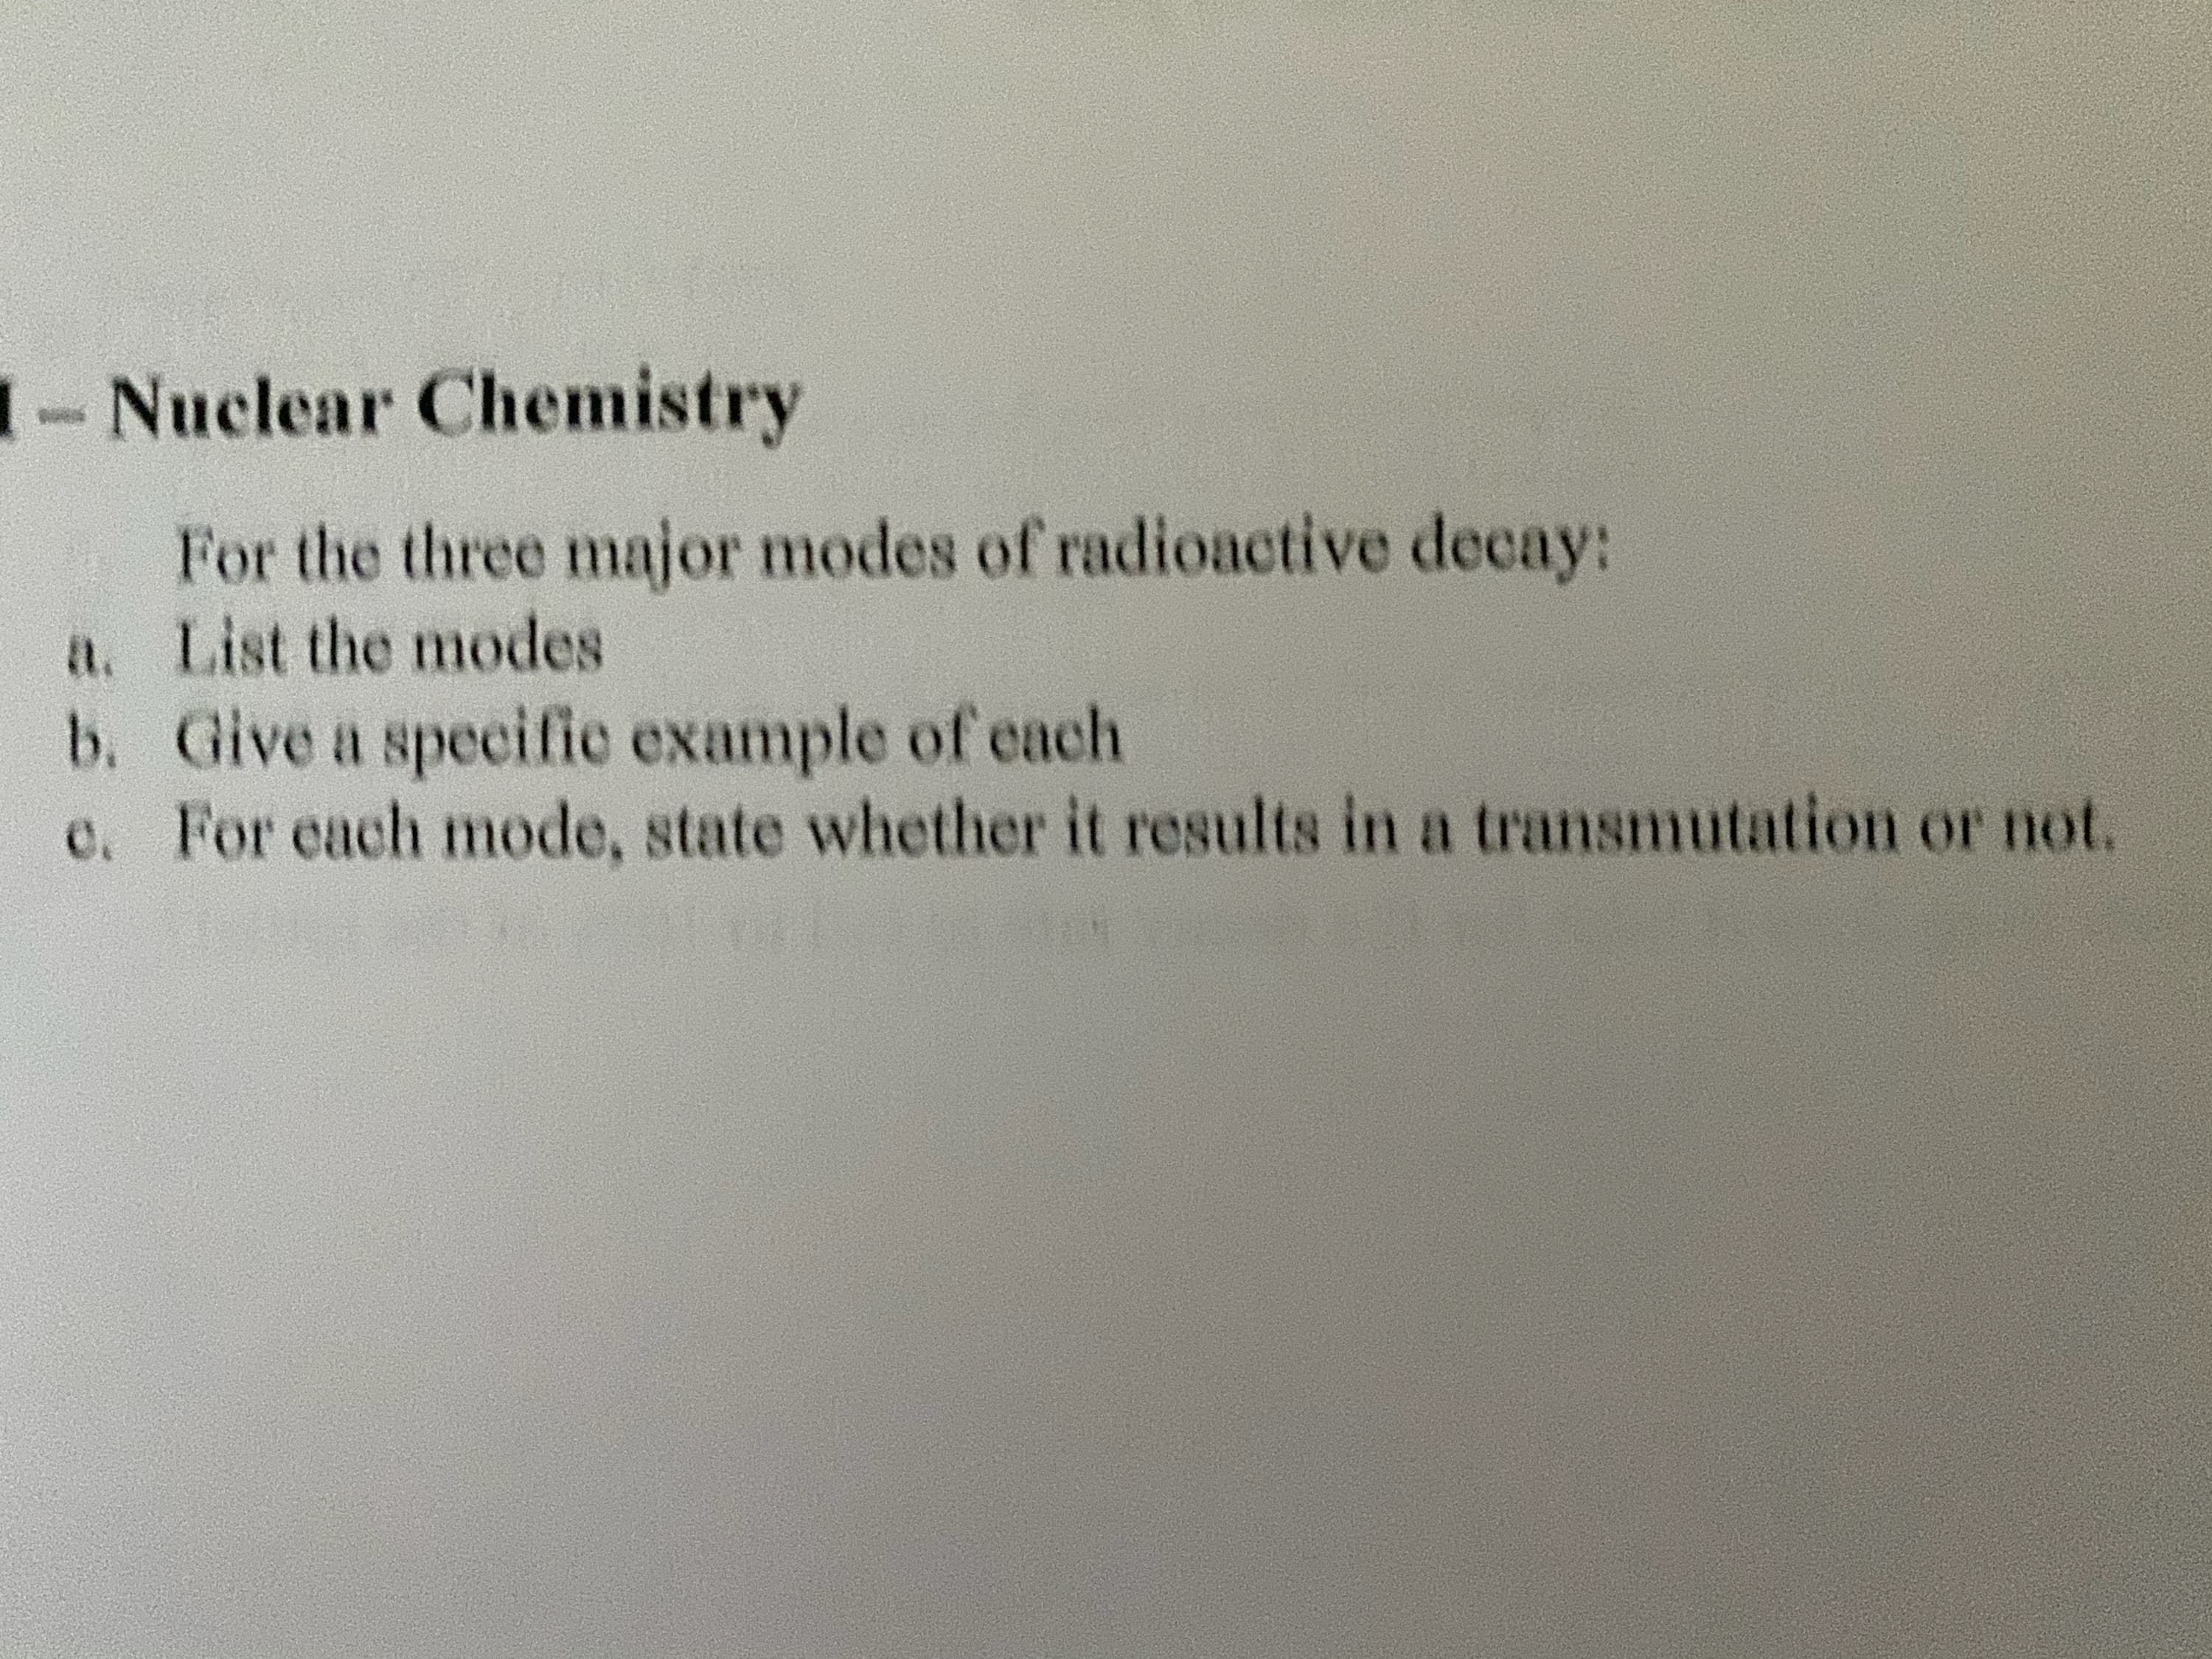 1- Nuclear Chemistry
For the three major modes of radioactive decay:
a. List the modes
b. Give a specific example of each
e. For each mode, state whether it results in a transmutation or not.
